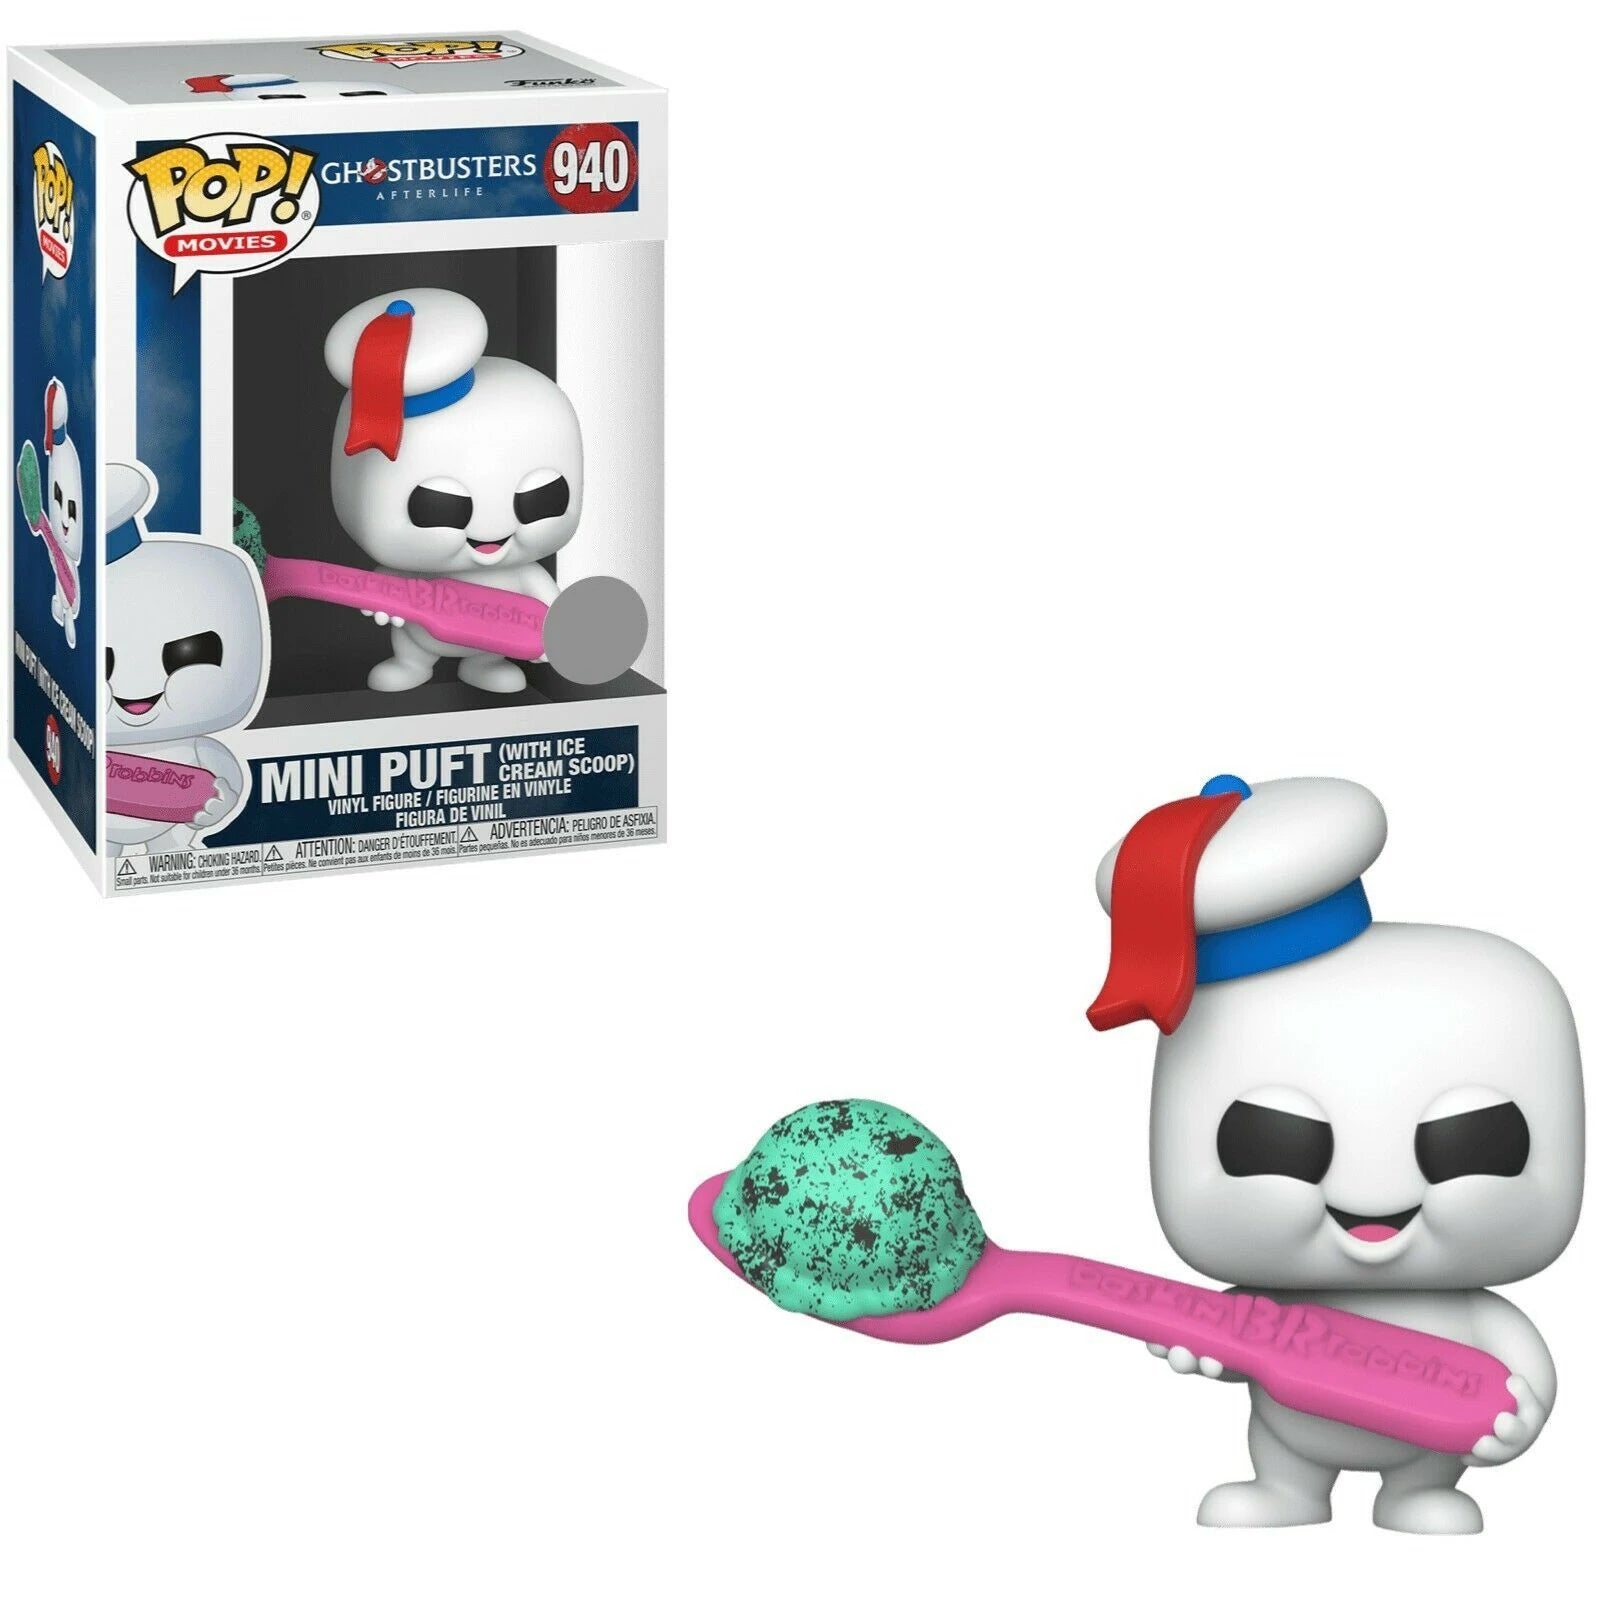 Mini Puft (With Ice Cream Scoop) (Special Edition) #940 Ghostbusters Afterlife Pop! Vinyl